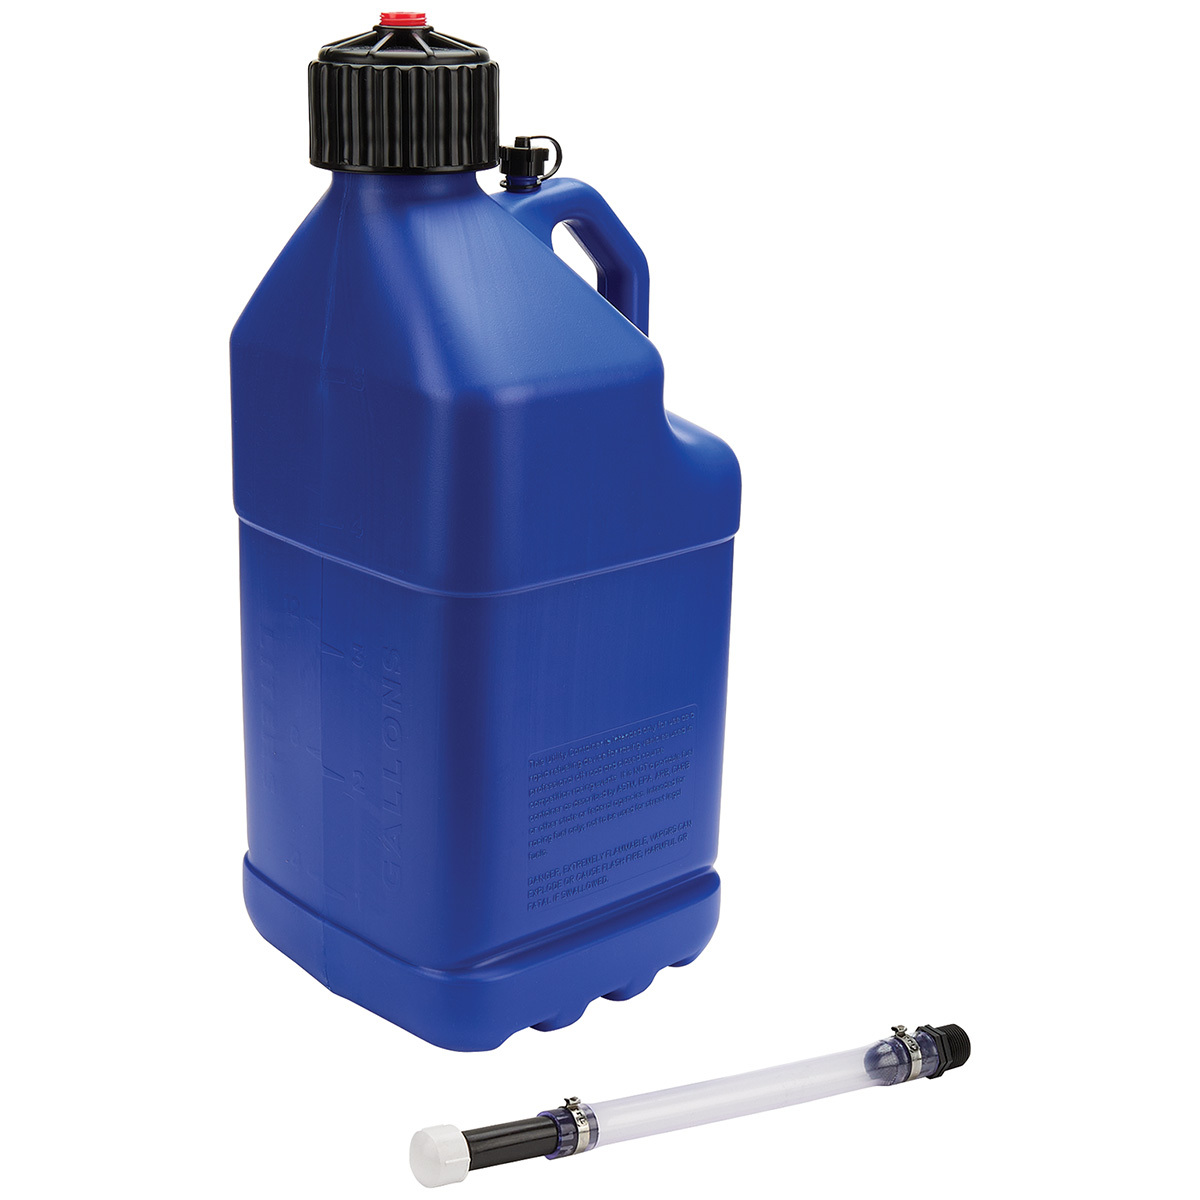 Allstar Performance 40122 Utility Jug, 5 gal, 9-1/2 x 9-1/2 x 22-3/4 in Tall, O-Ring Seal Cap, Screw-On Vent, Filler Hose, Square, Plastic, Blue, Each